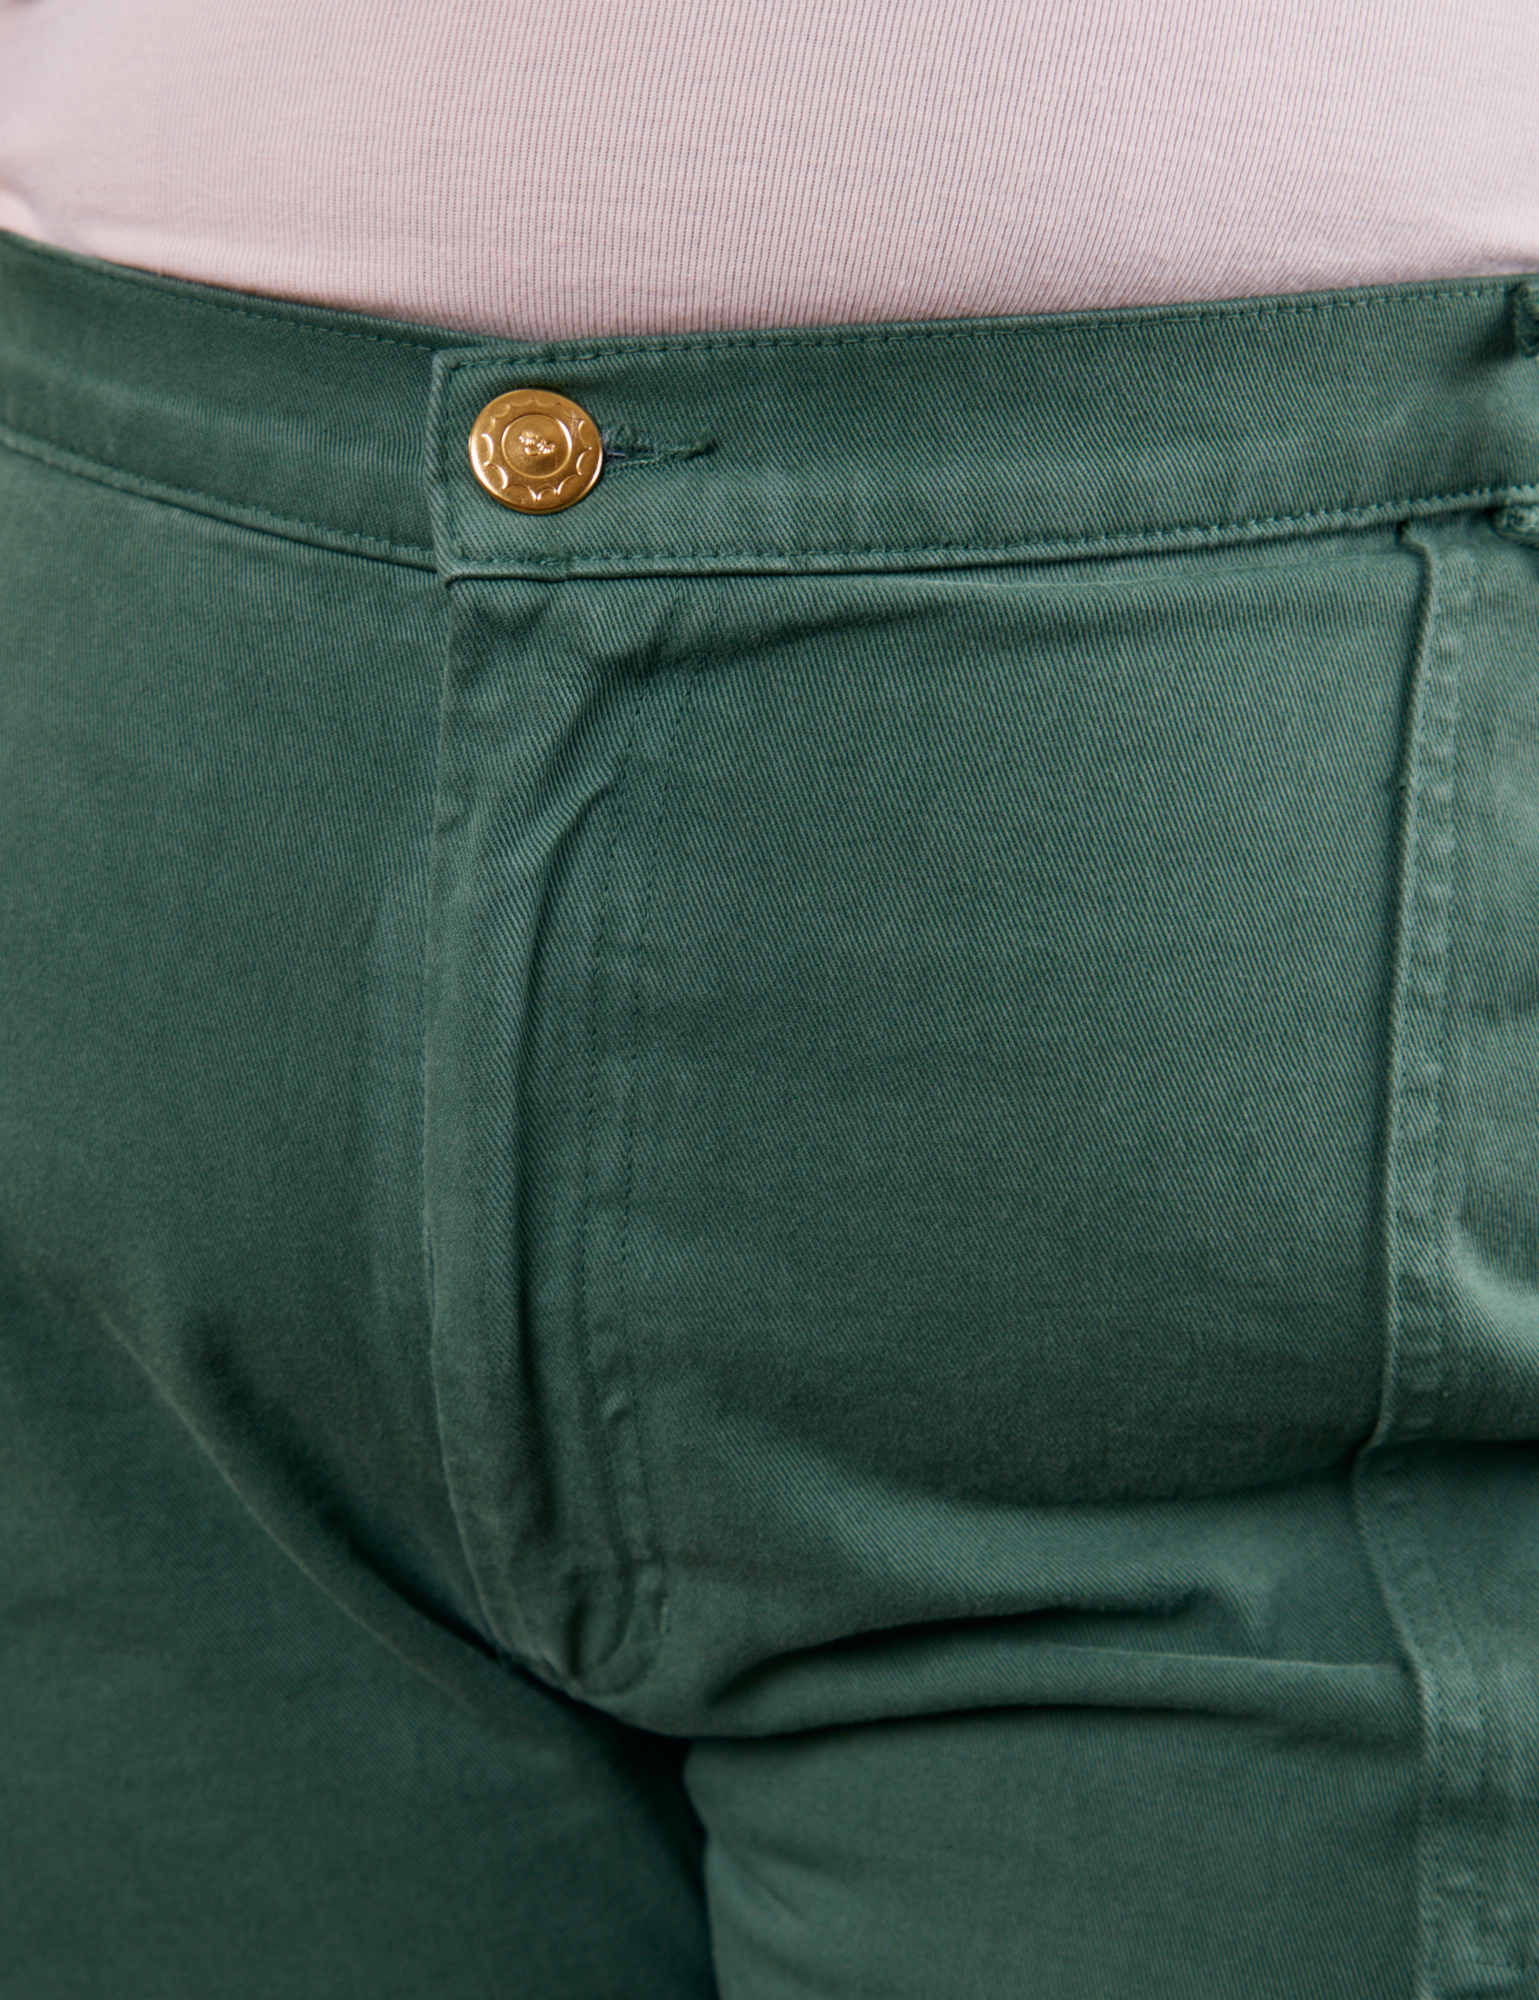 Work Pants in Dark Emerald Green front close up with gold sun baby button on Morgan